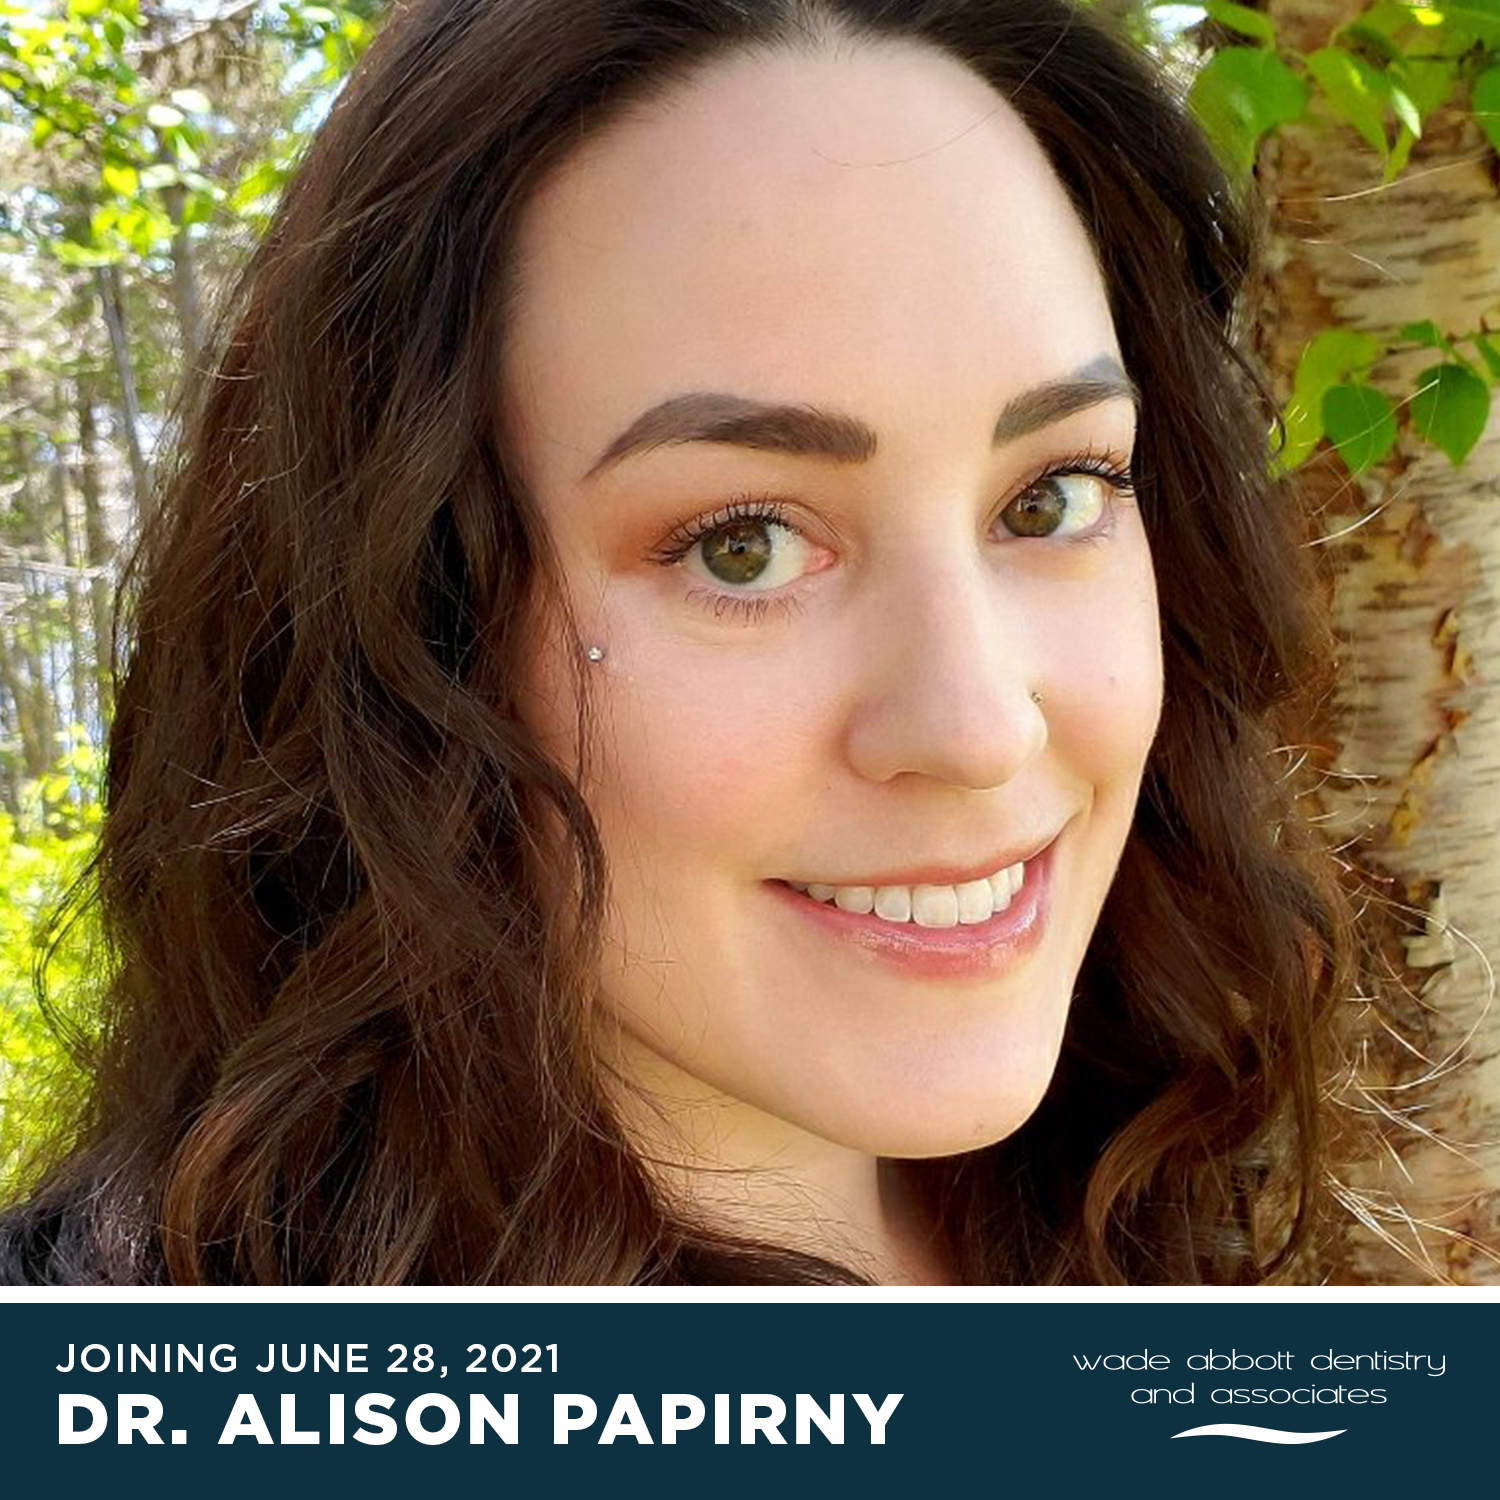 Welcome Dr. Alison Papirny to Wade Abbott Dentistry on June 28, 2021!